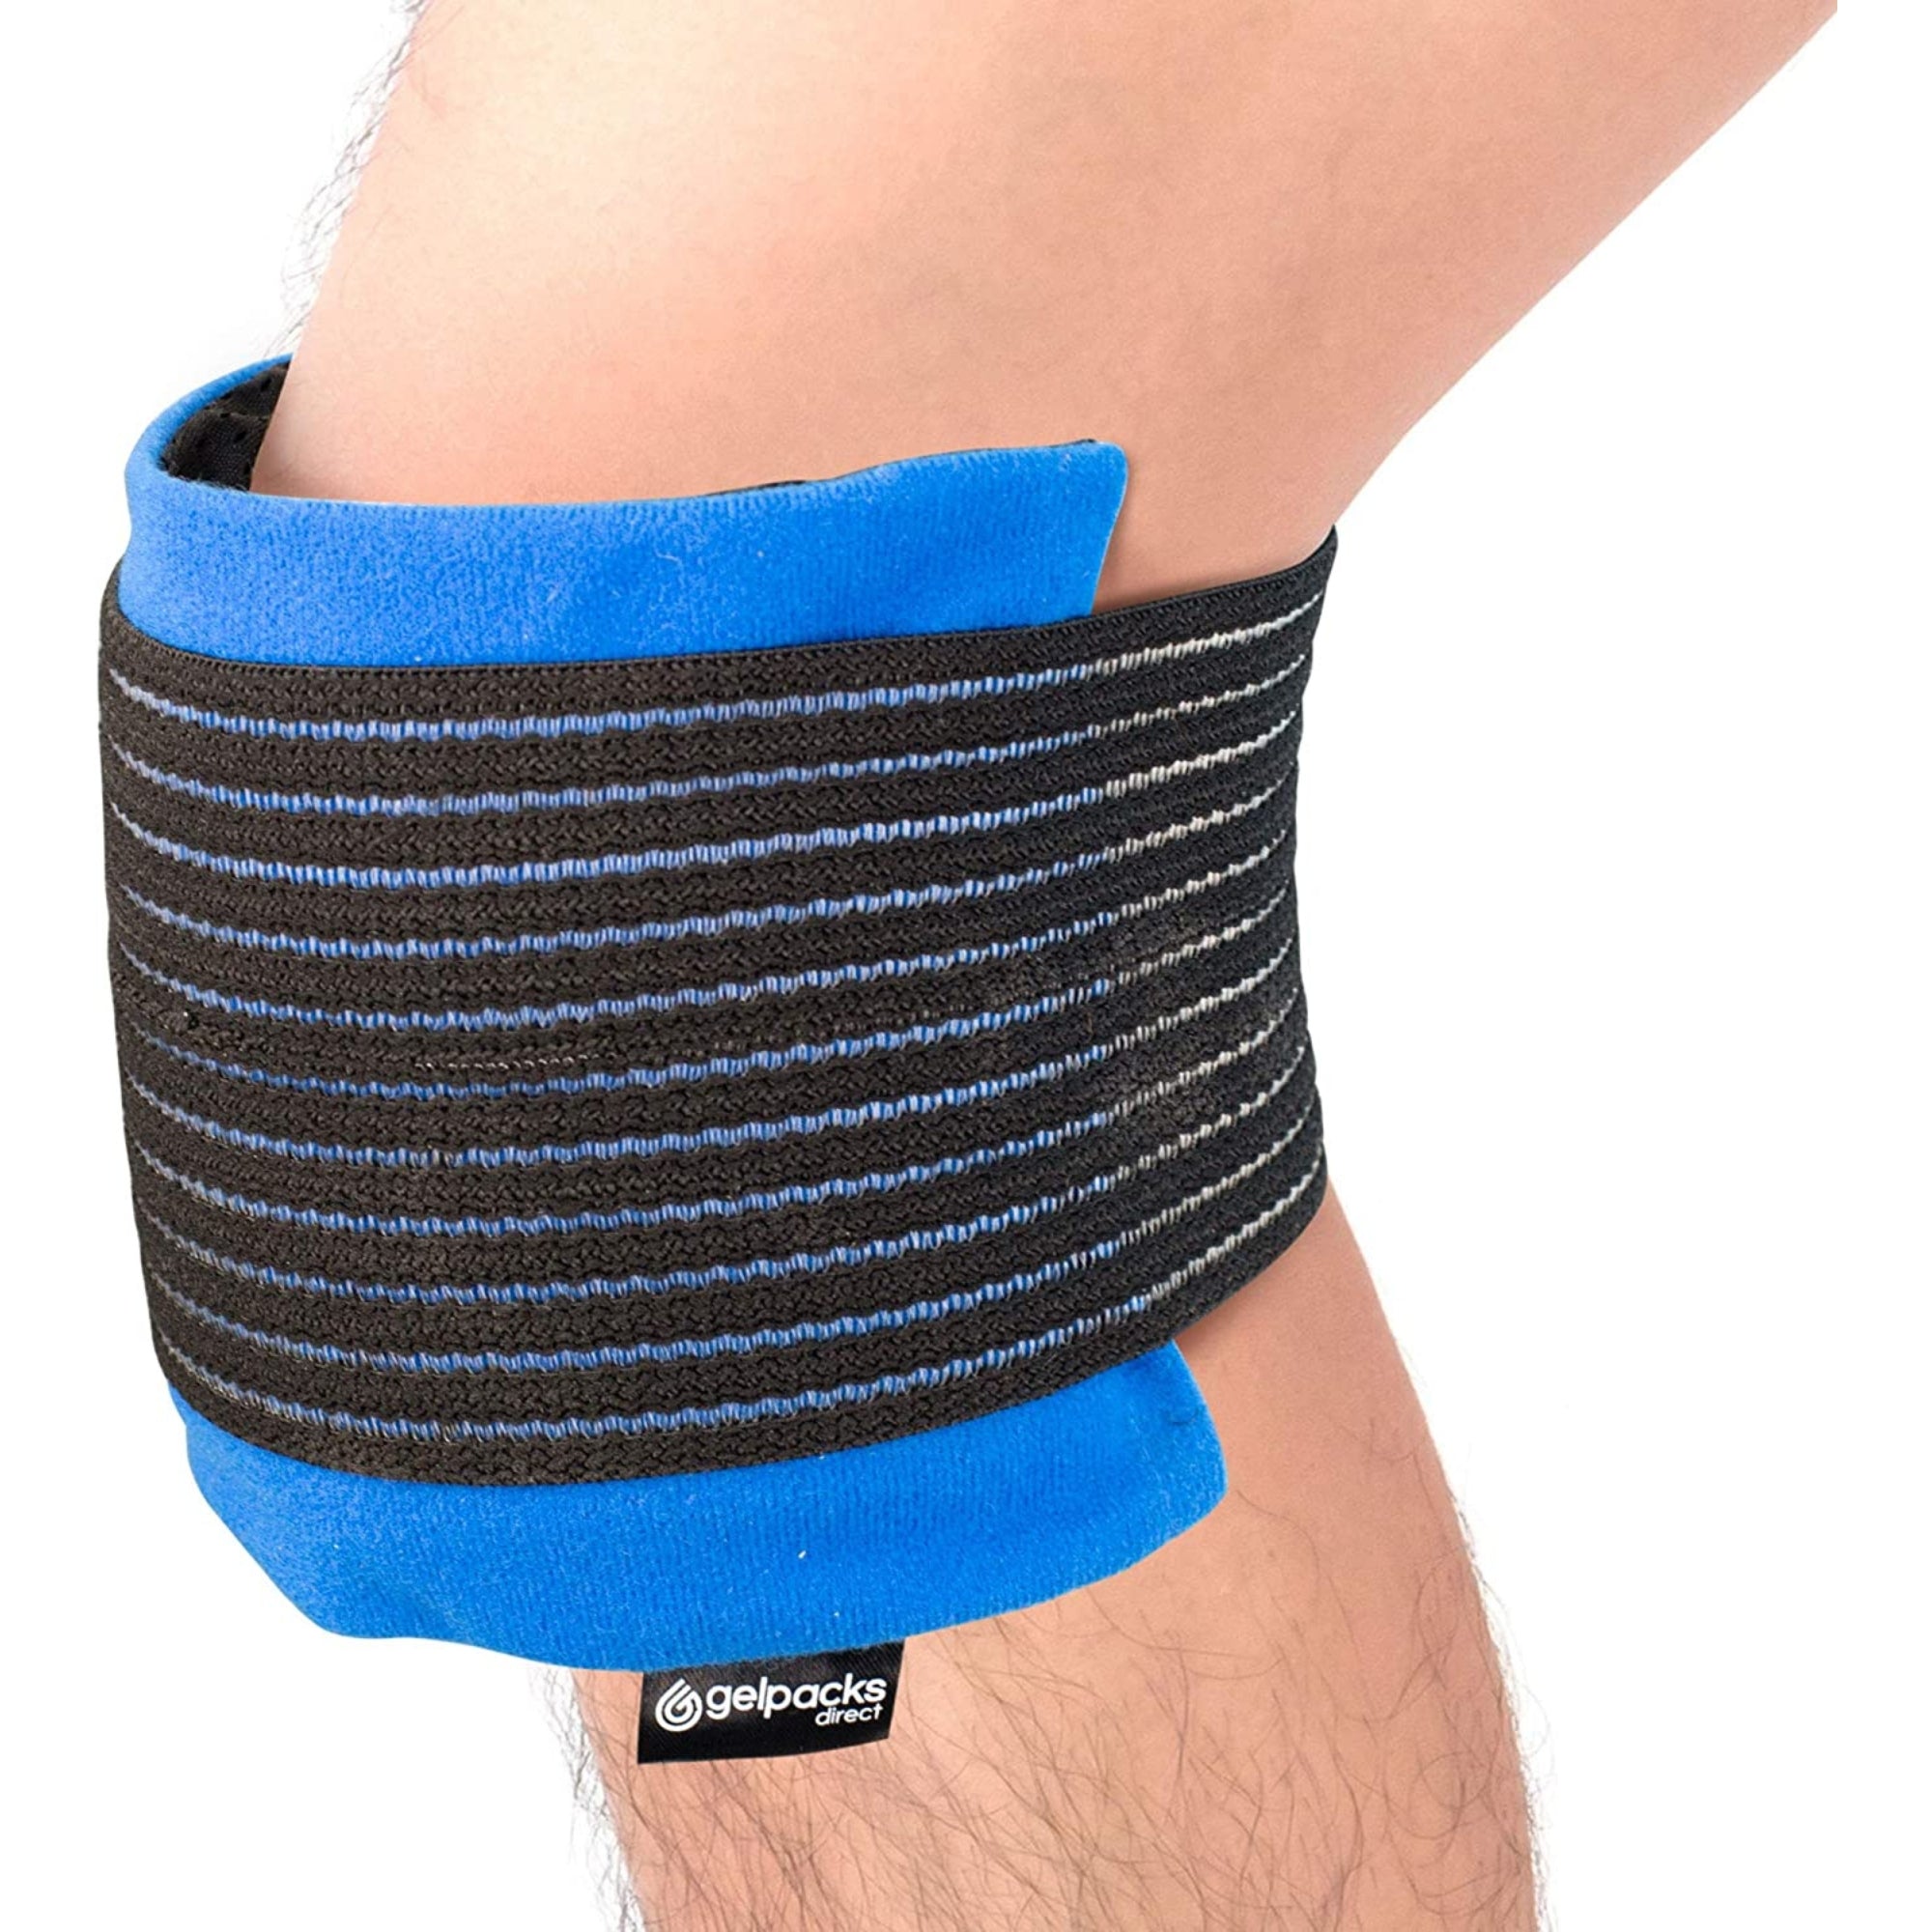 GPD 3in1 - Knee Ice Pack Wrap for Injuries (Hot/Cold) Reusable